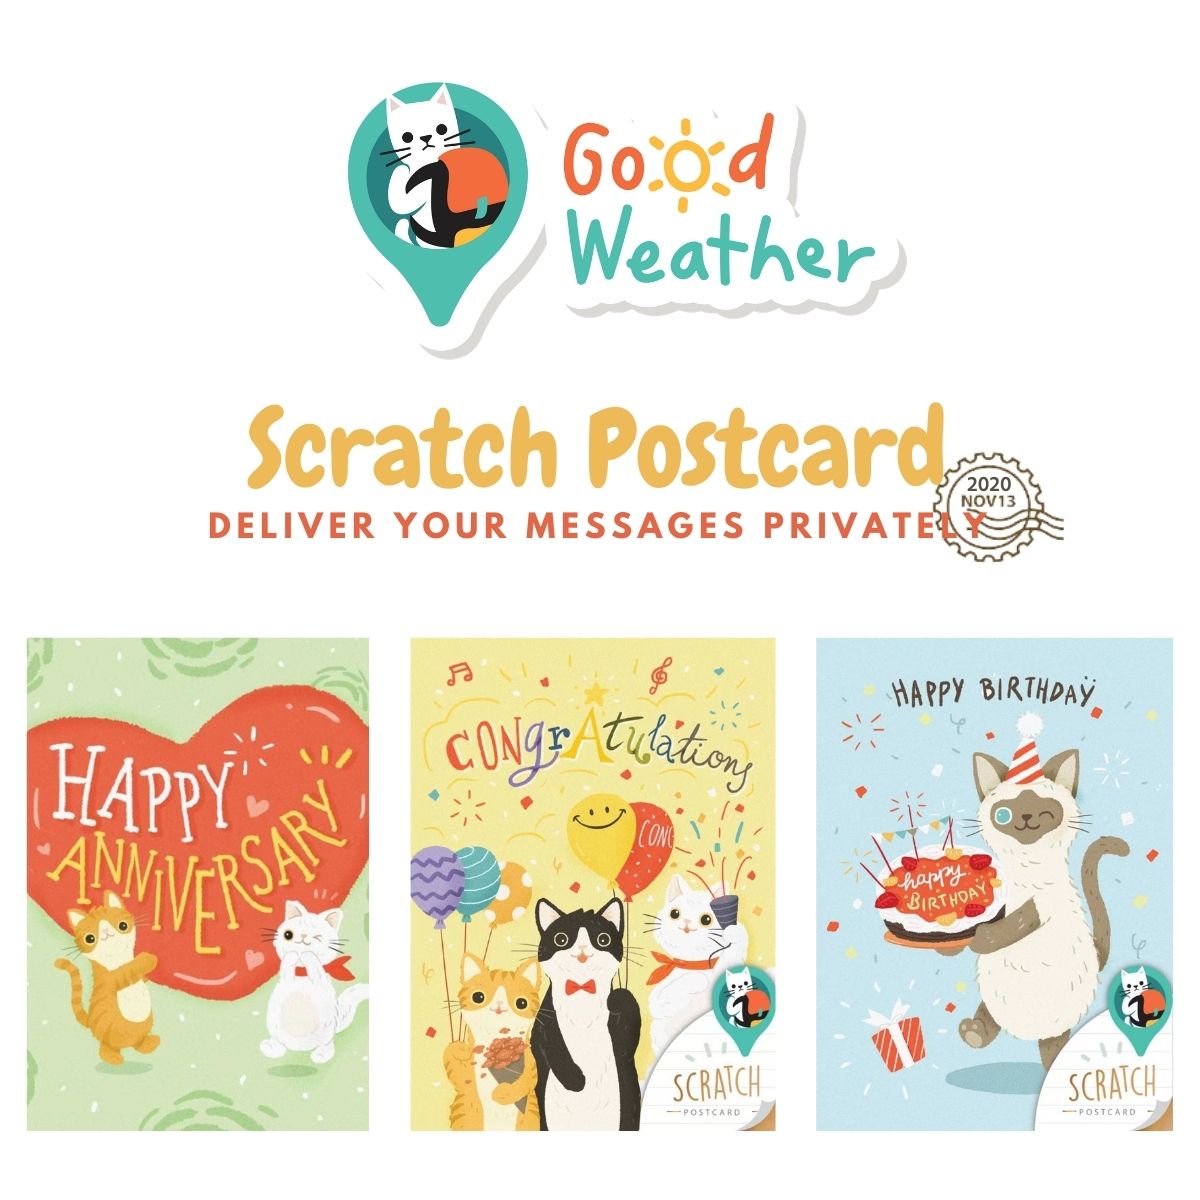 GW-GoodWeather-Scratch-Postcard-Scratchable-private-postcard-main-product-photo- scratching postcard- gift idea